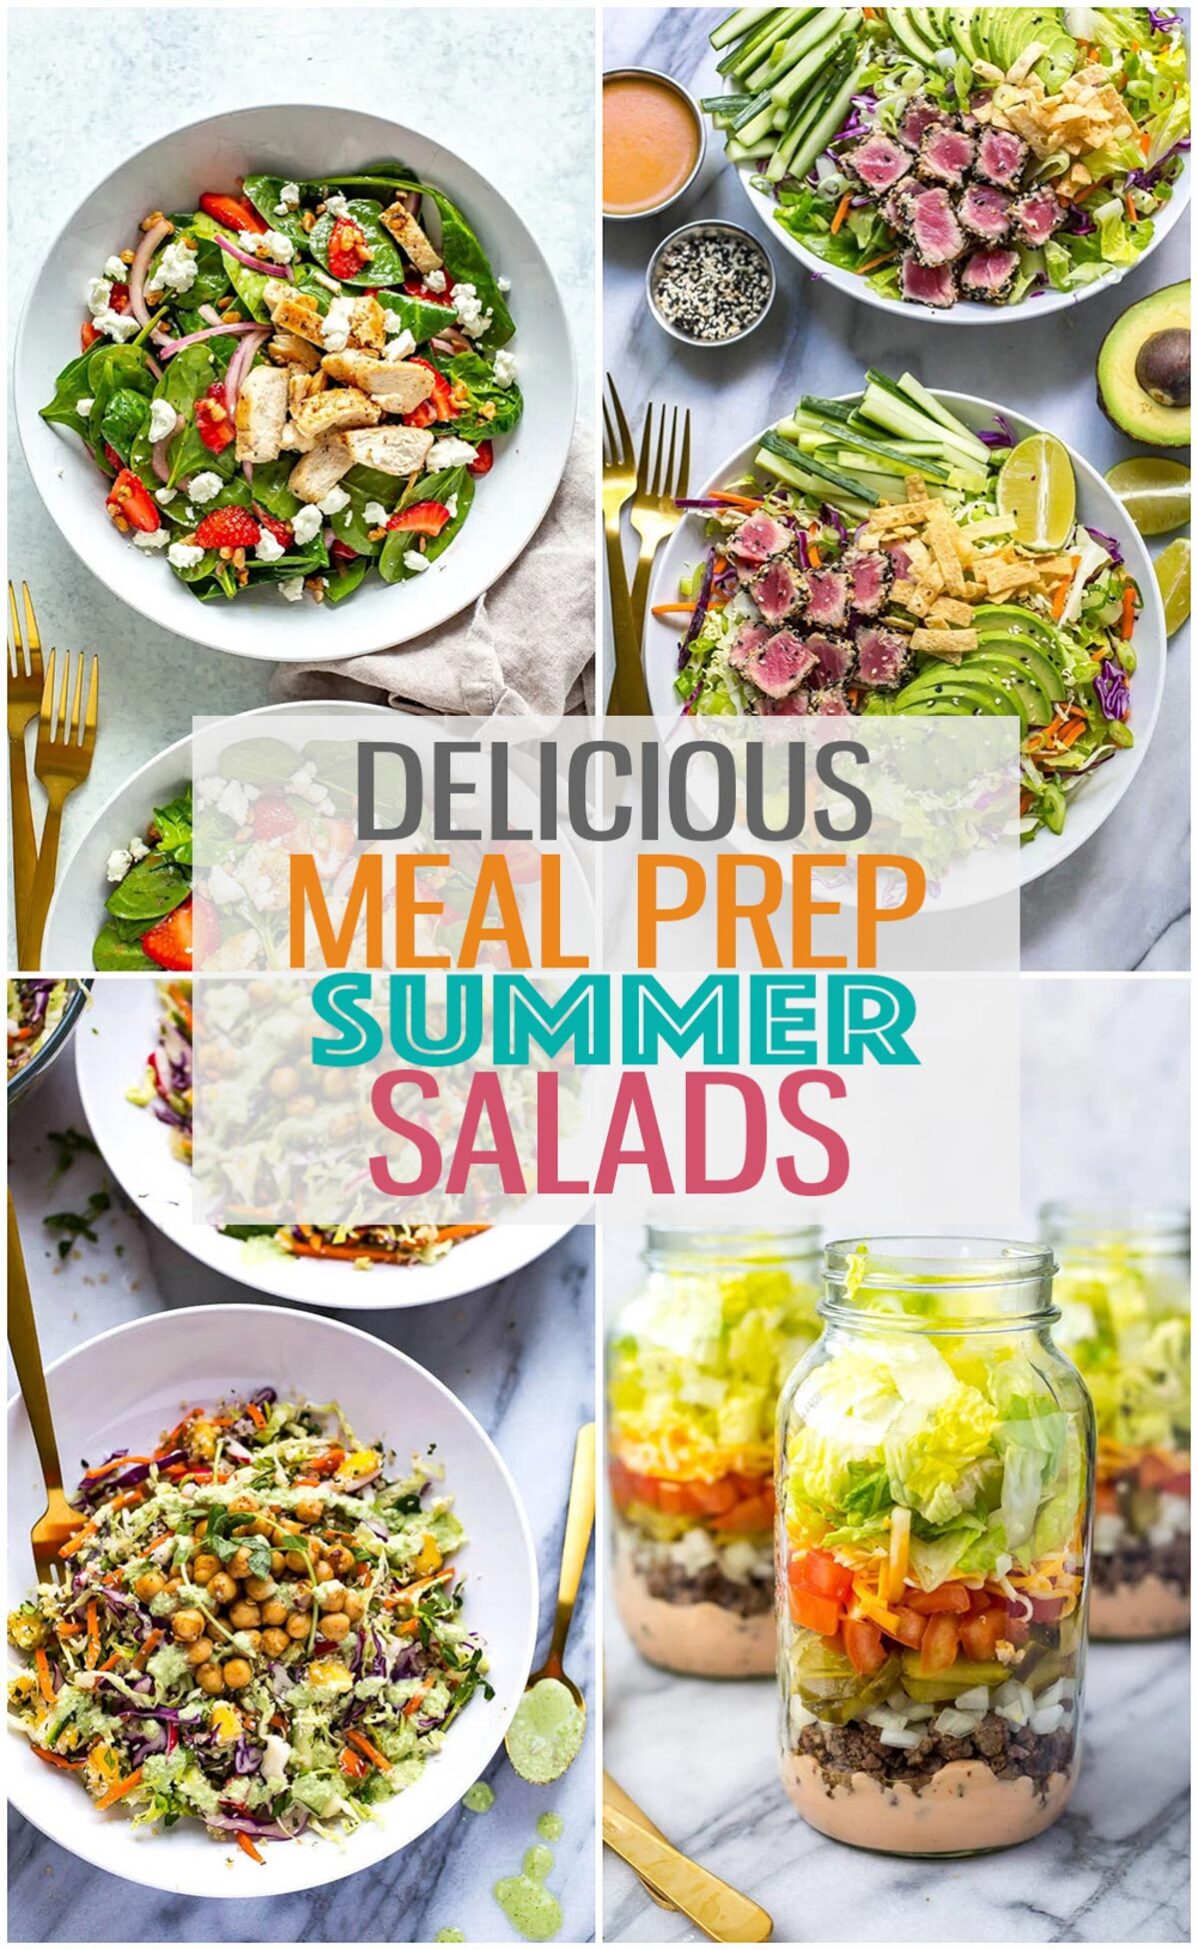 A collage of four different salads with the text "Delicious Meal Prep Summer Salads" layered over top.